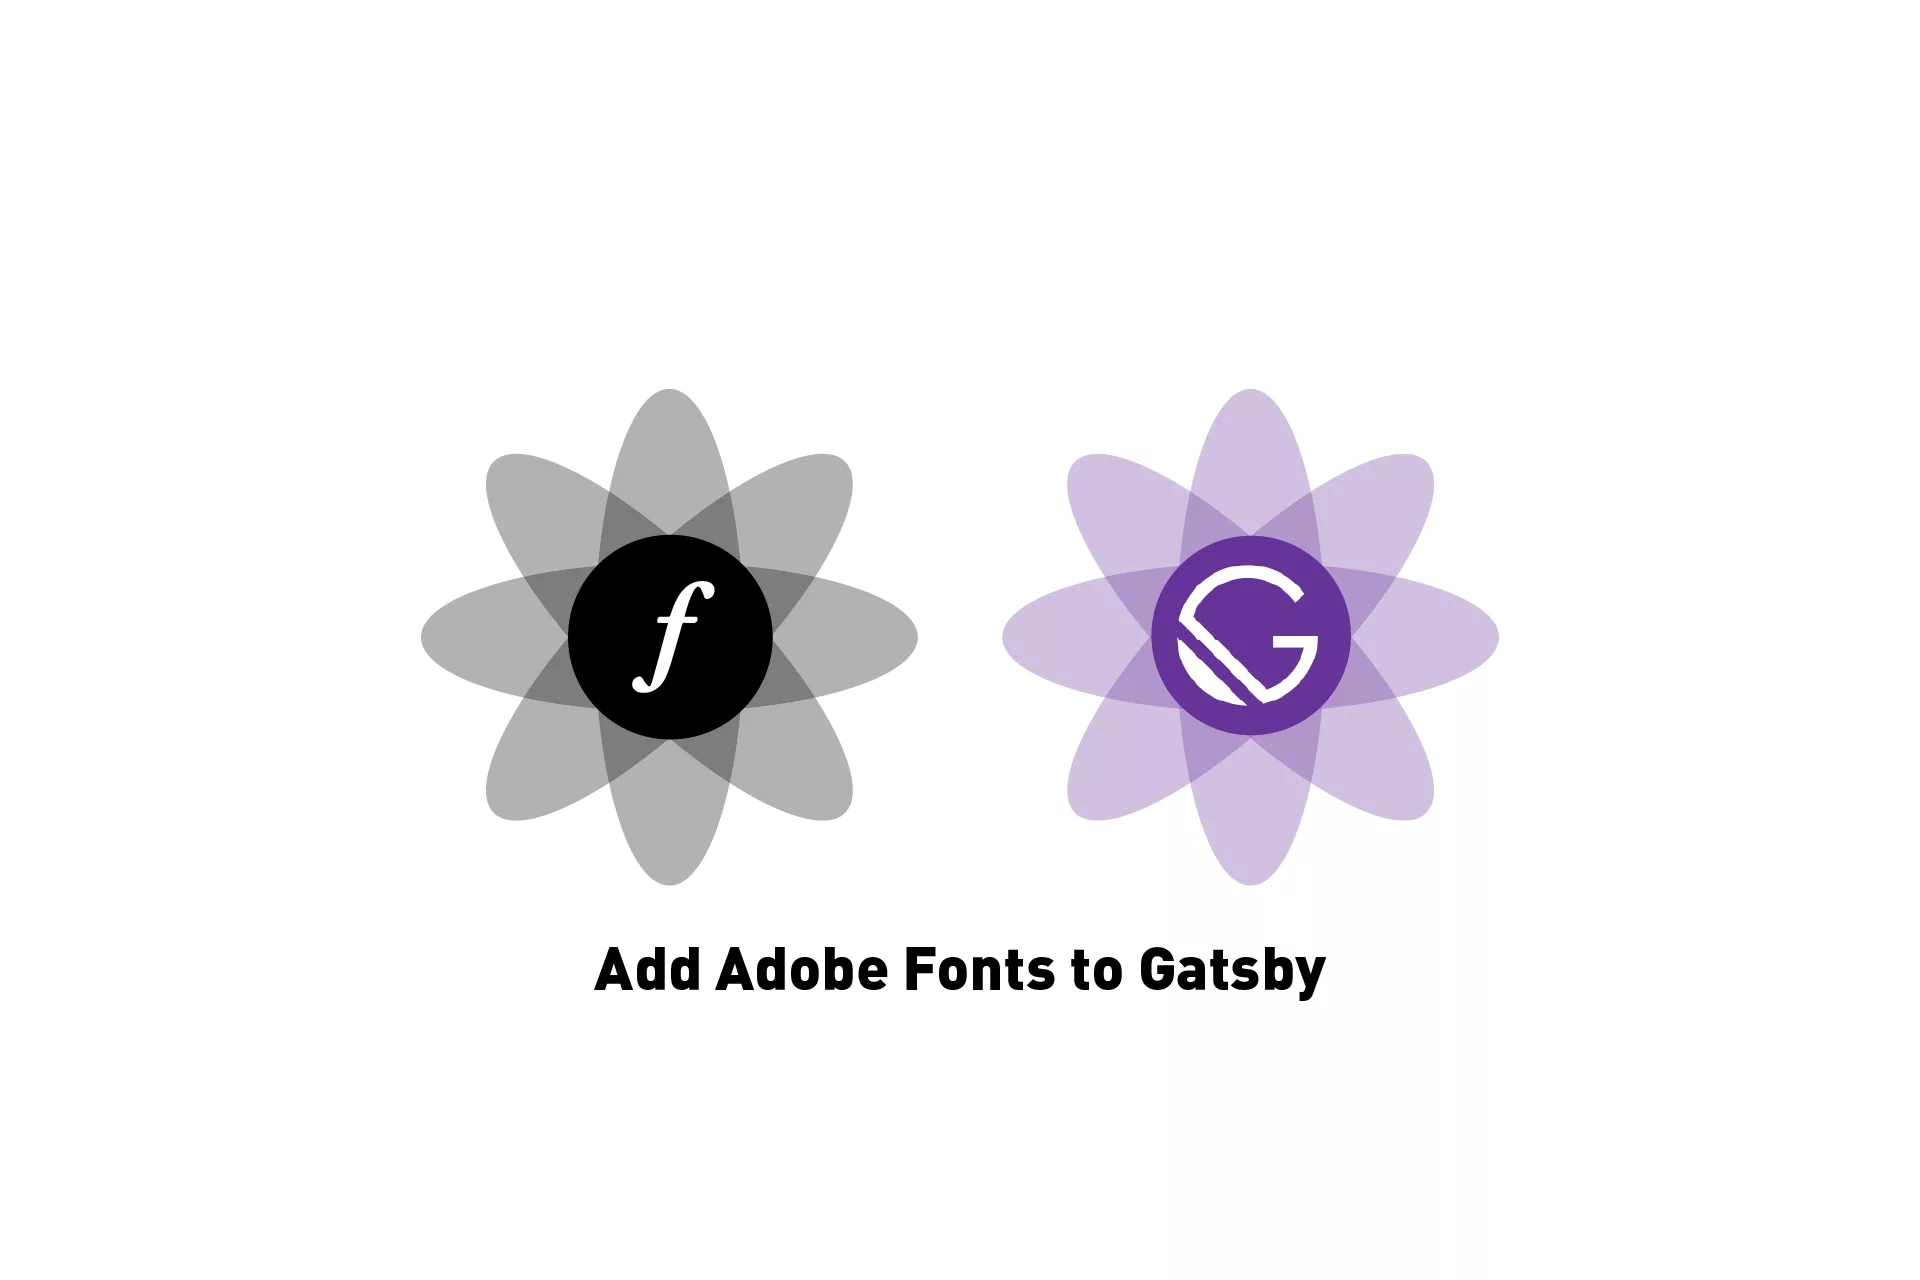 Two flowers that represent Adobe Fonts & Gatsby side by side with the text 'Add Adobe Fonts to Gatsby' beneath it.